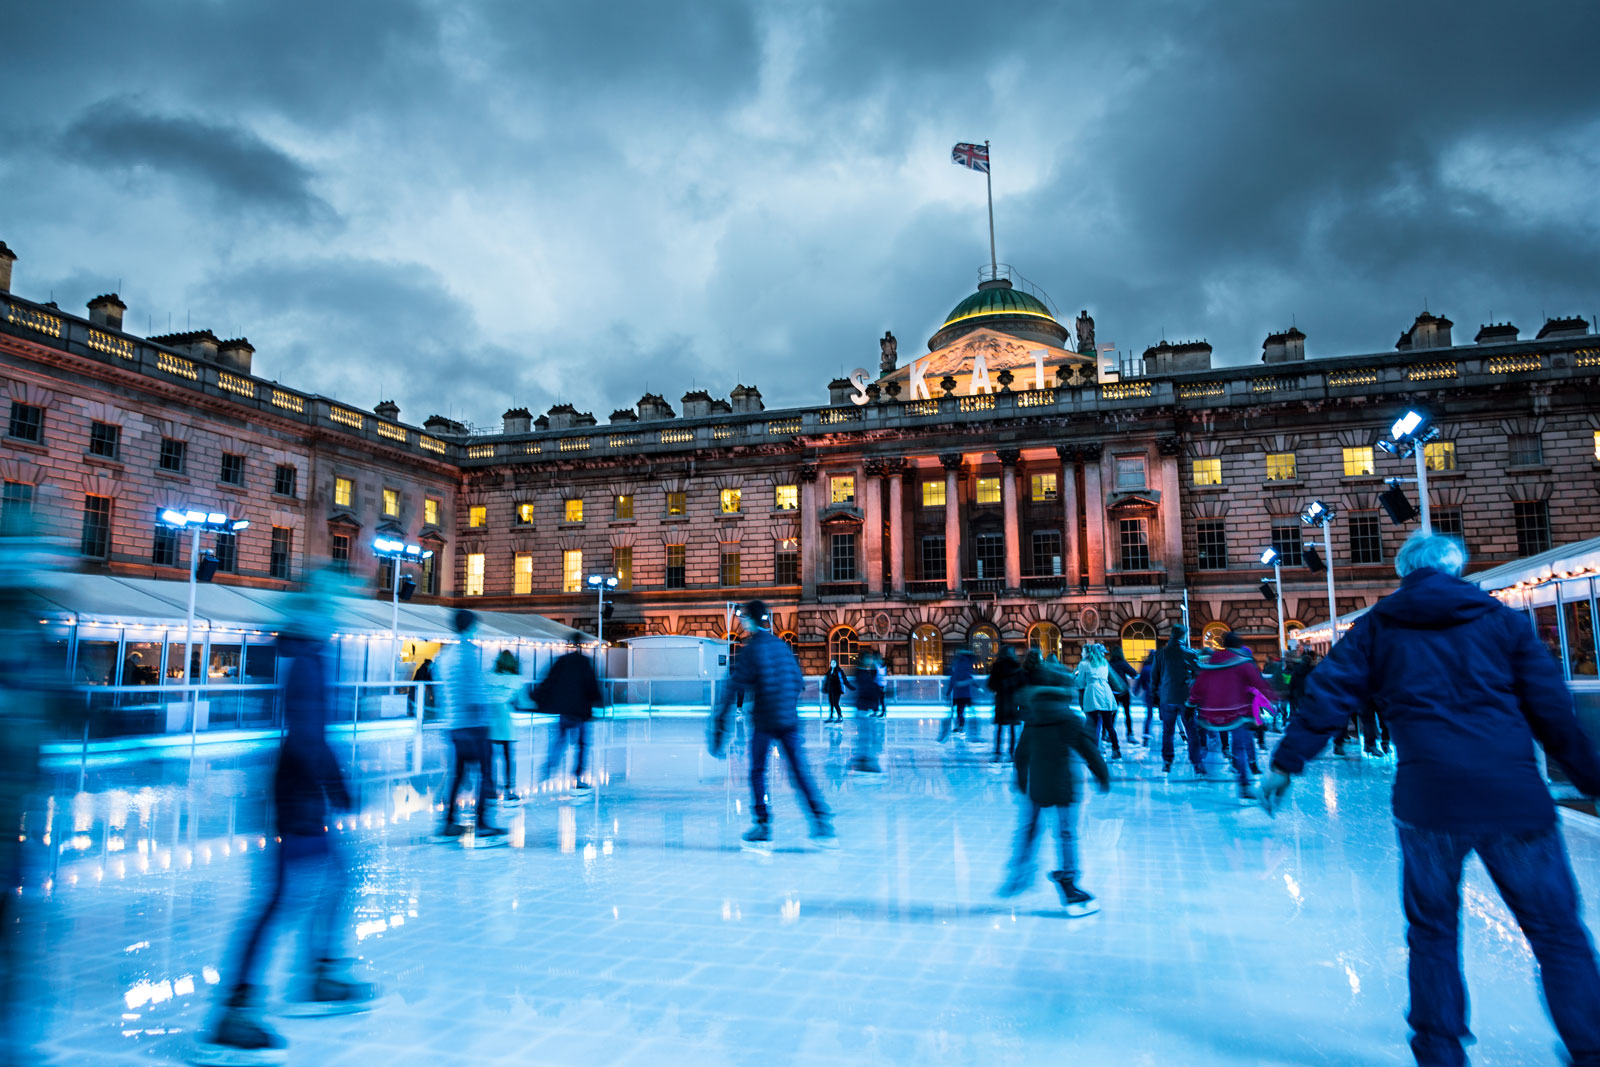 People ice skating at Somerset House in London